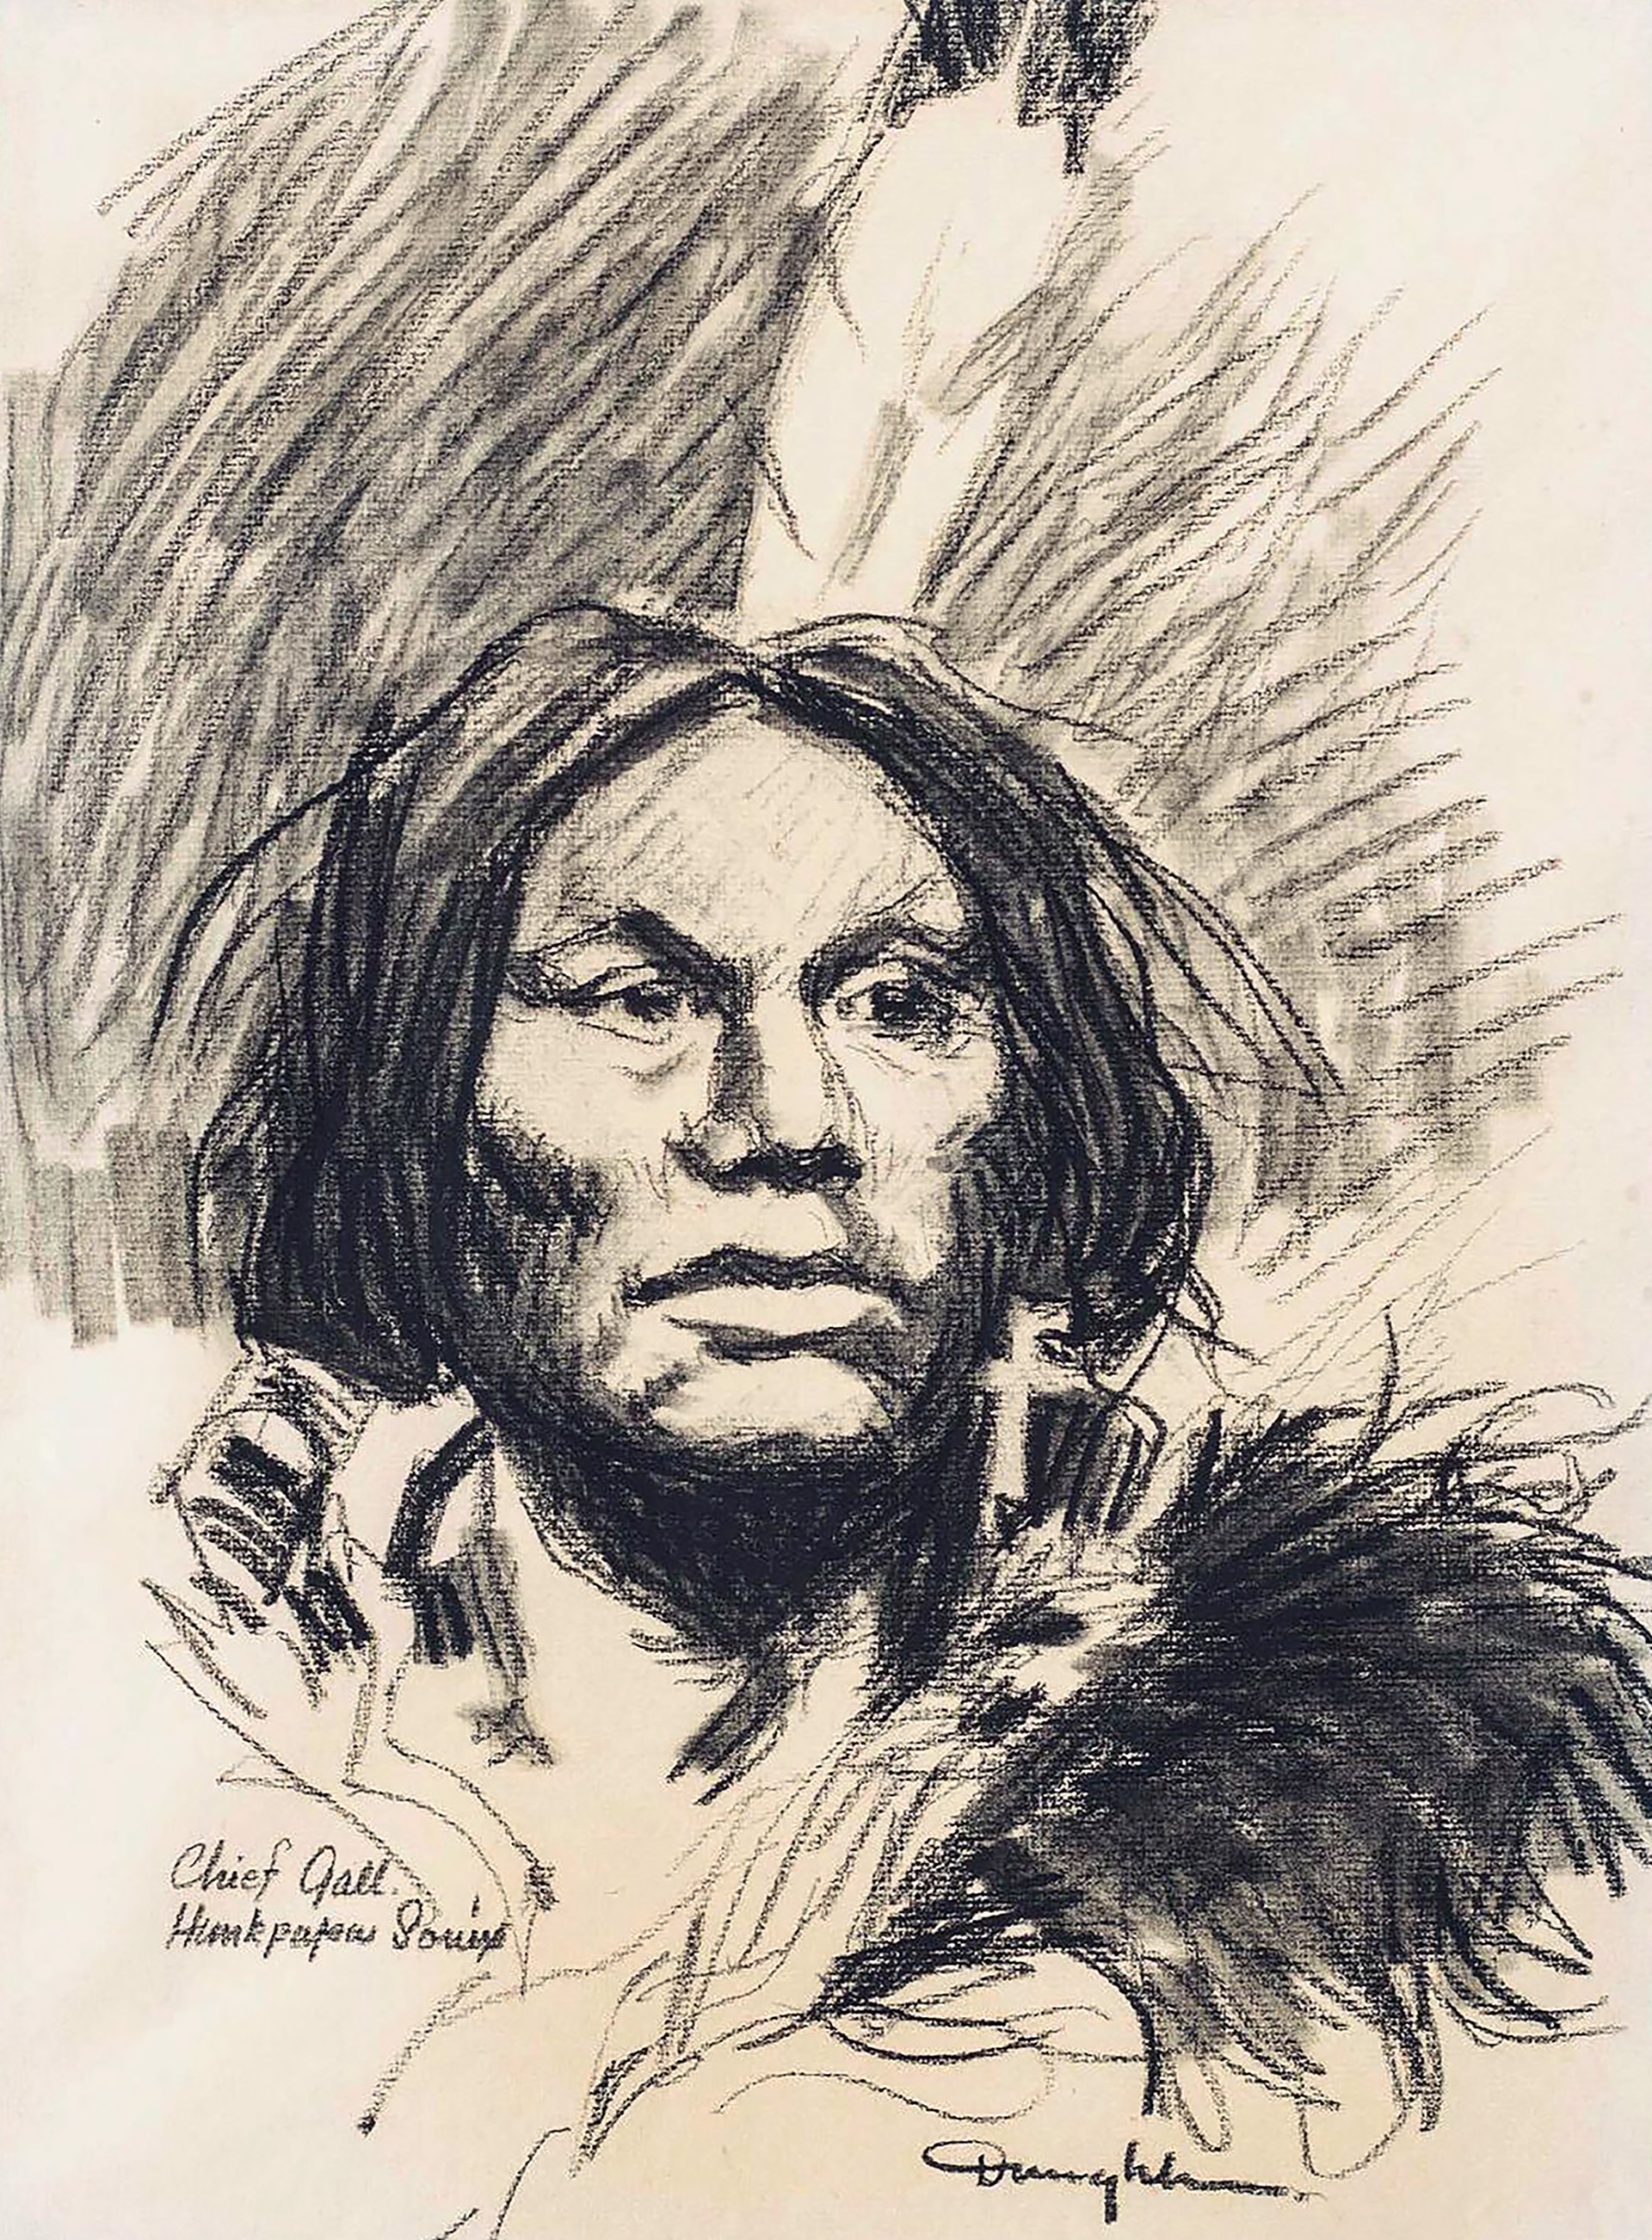 Chief Gall by Robert Daughters (1929-2013)